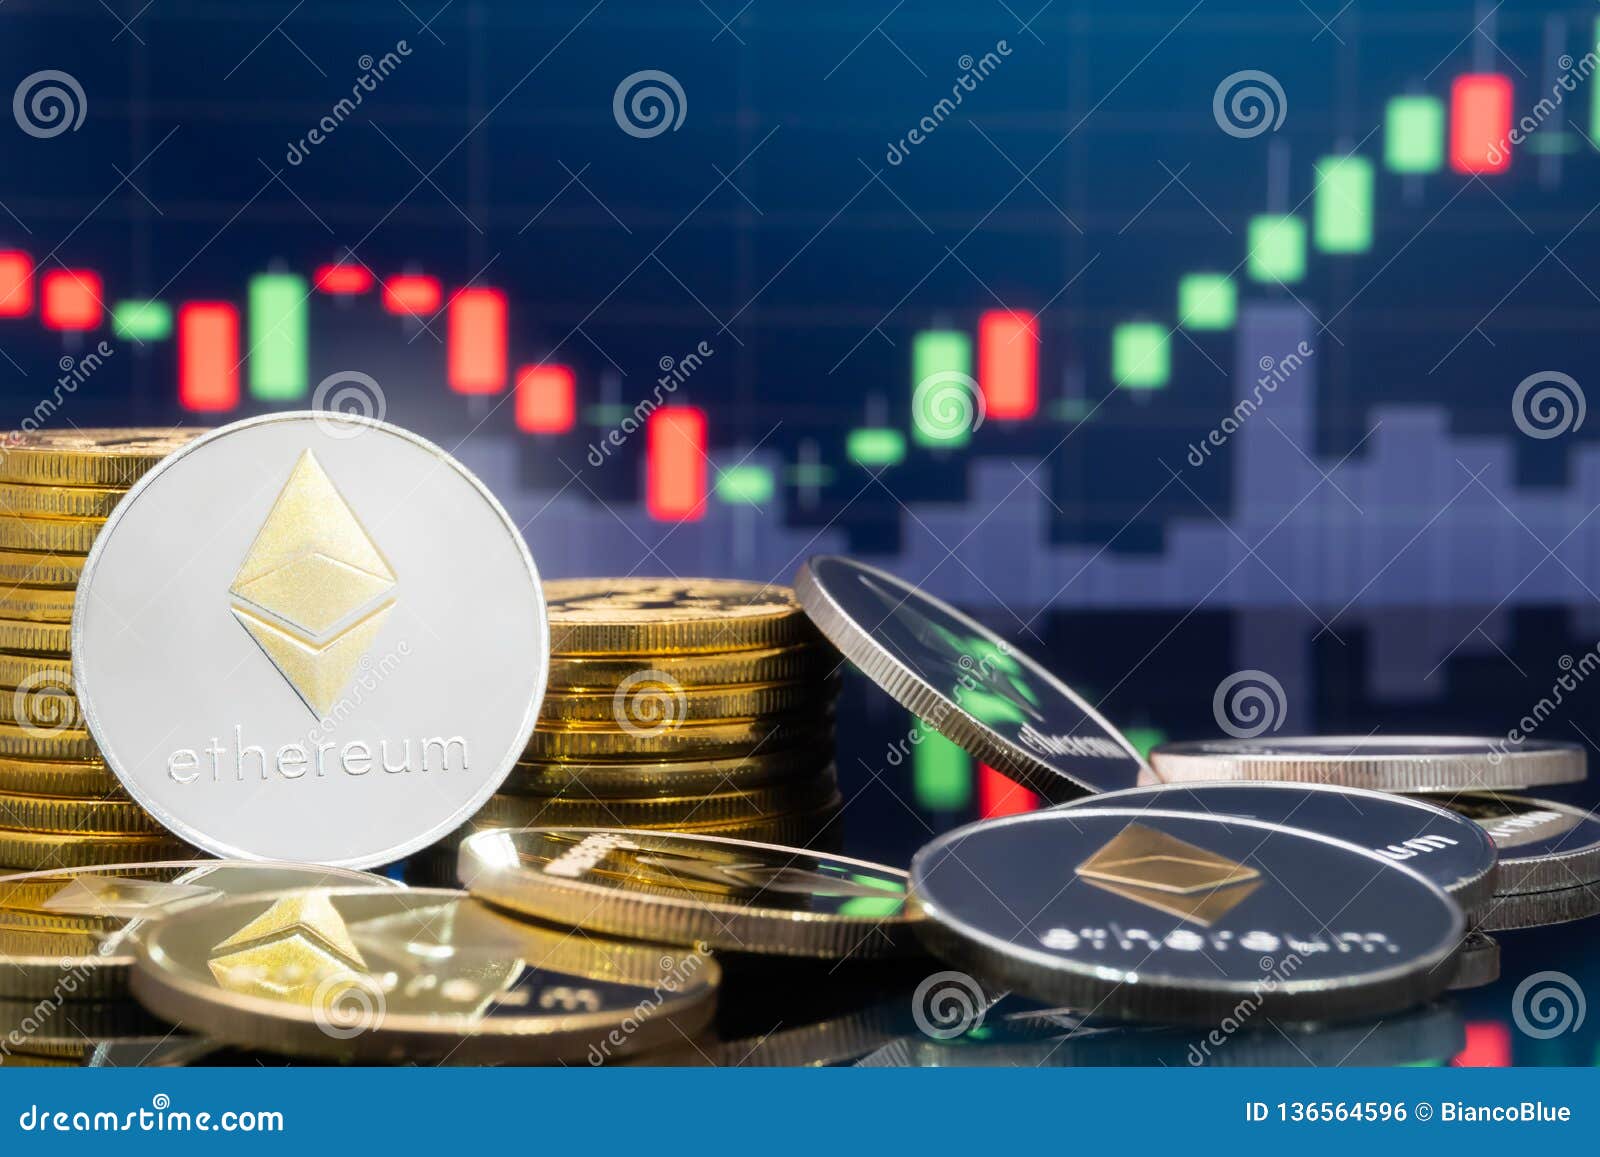 how to invest in ethereum stocks